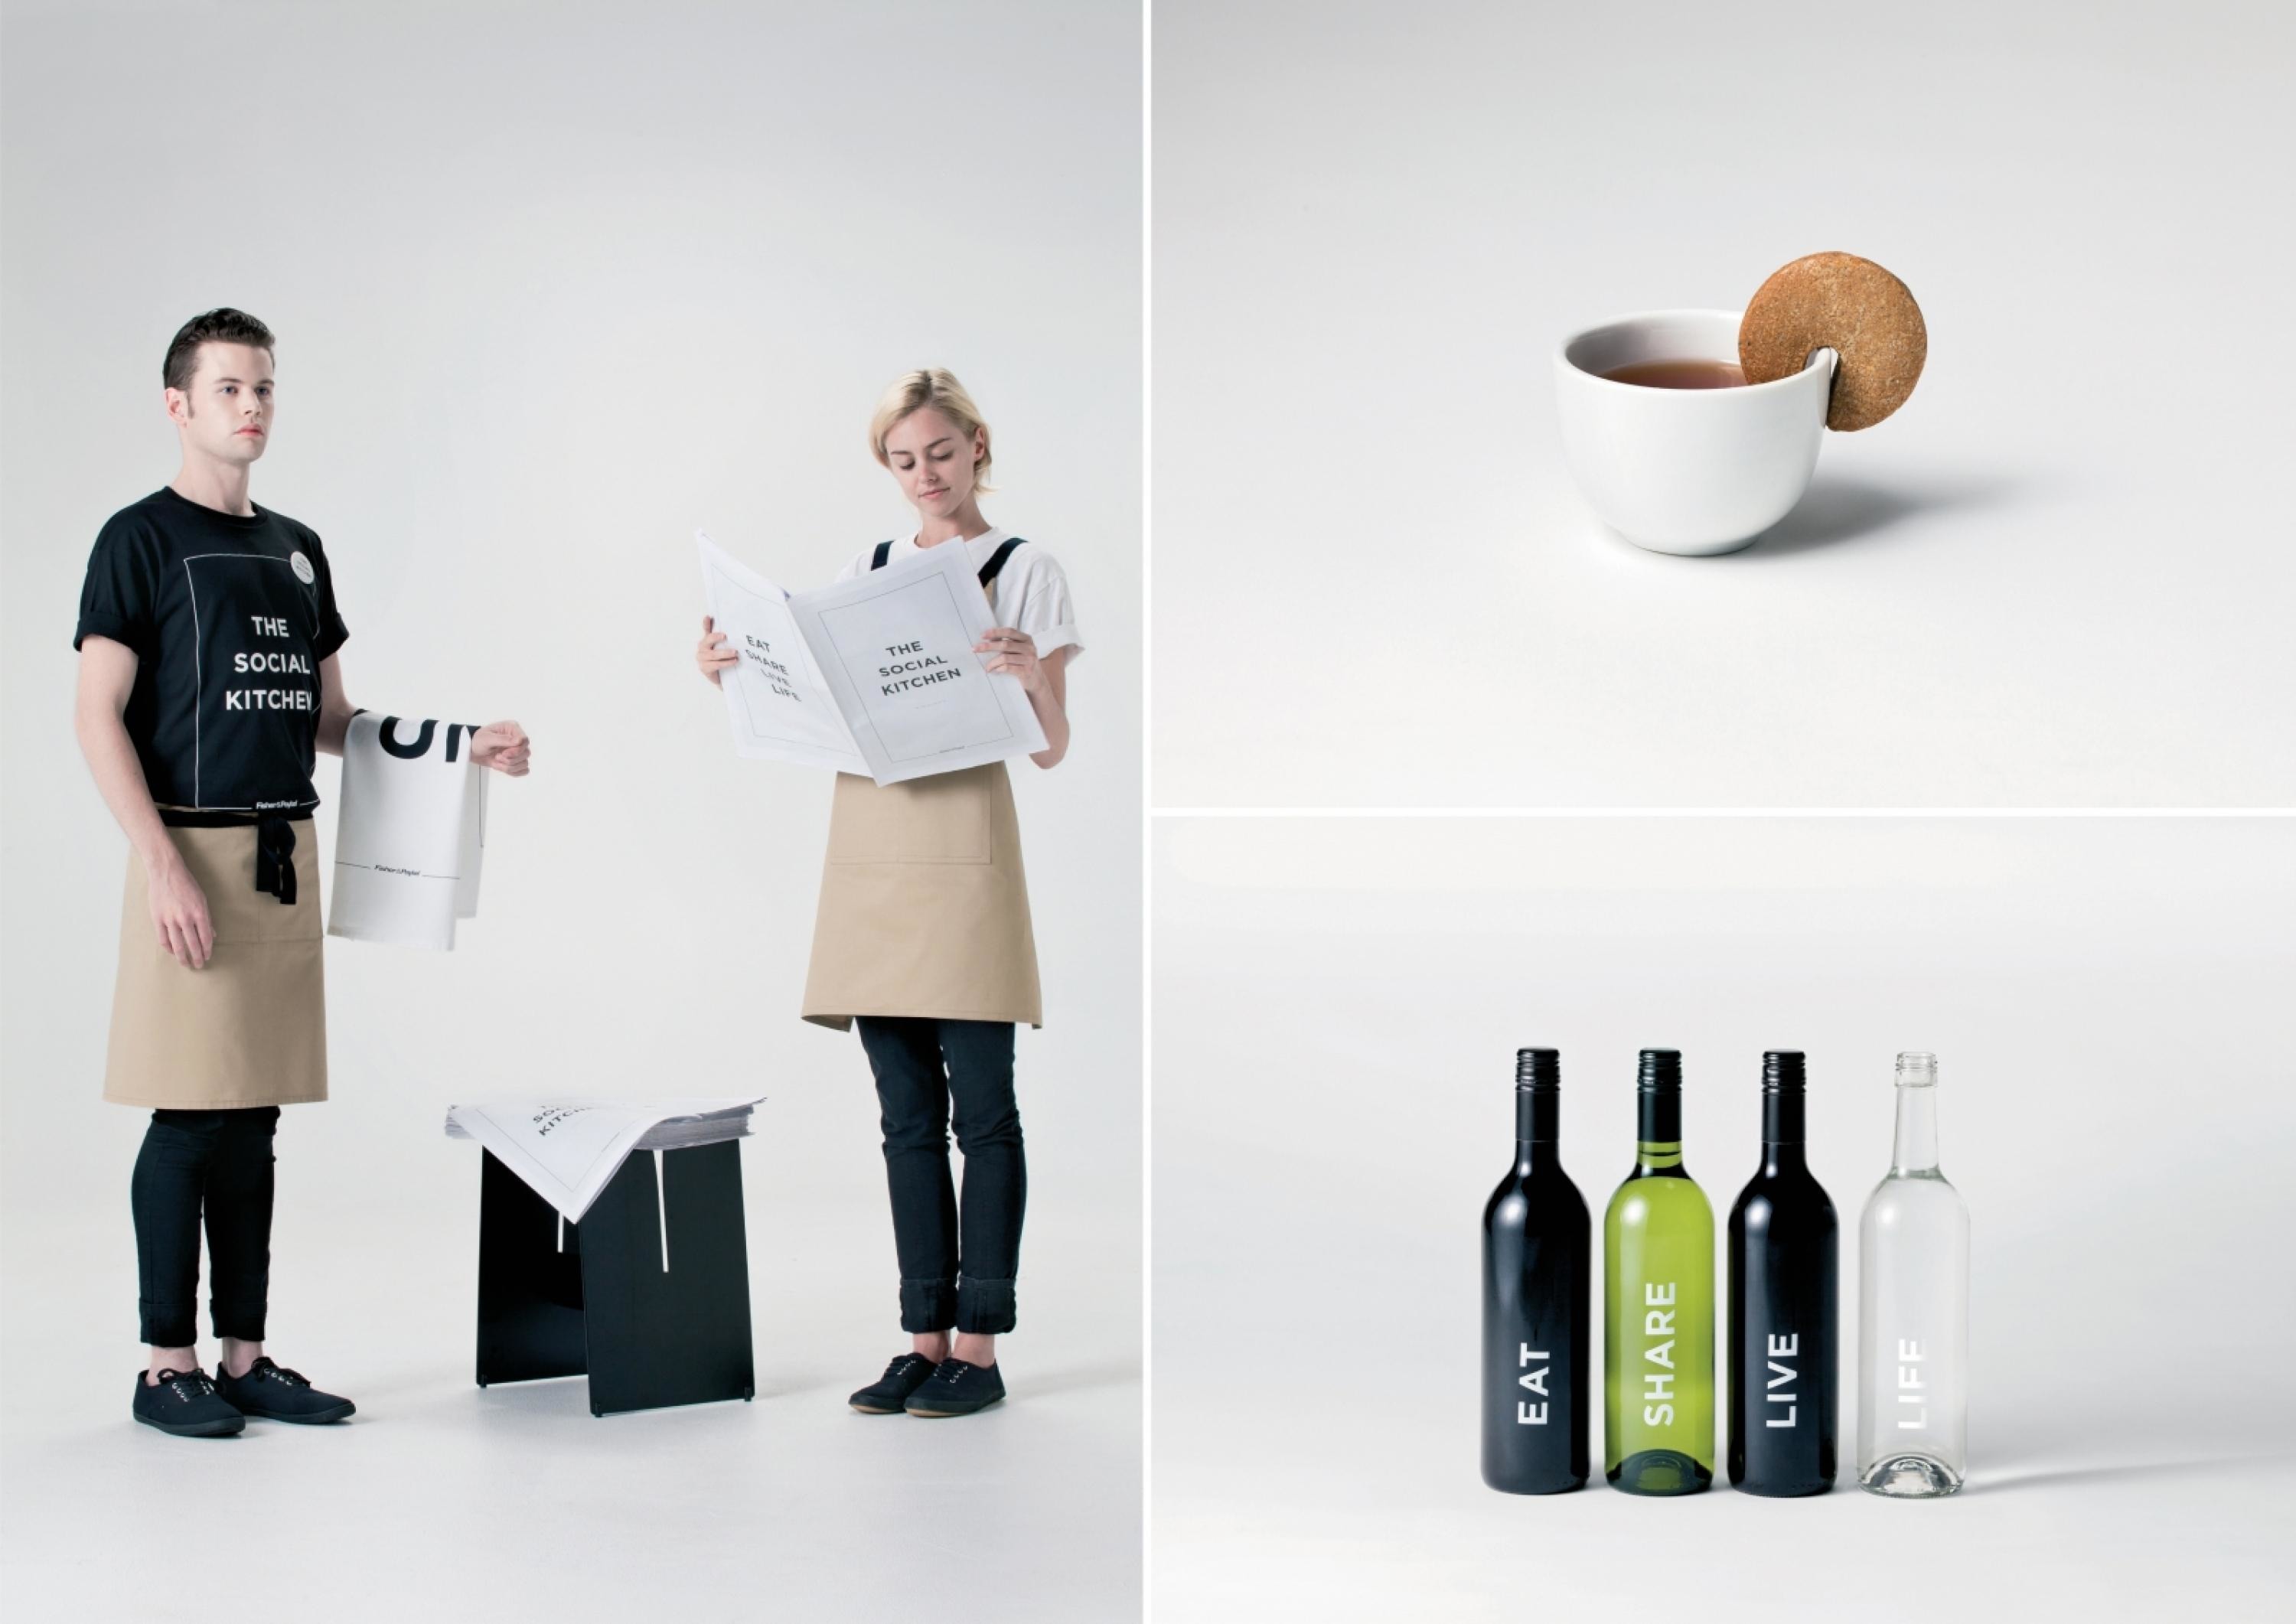 FISHER & PAYKEL: THE SOCIAL KITCHEN